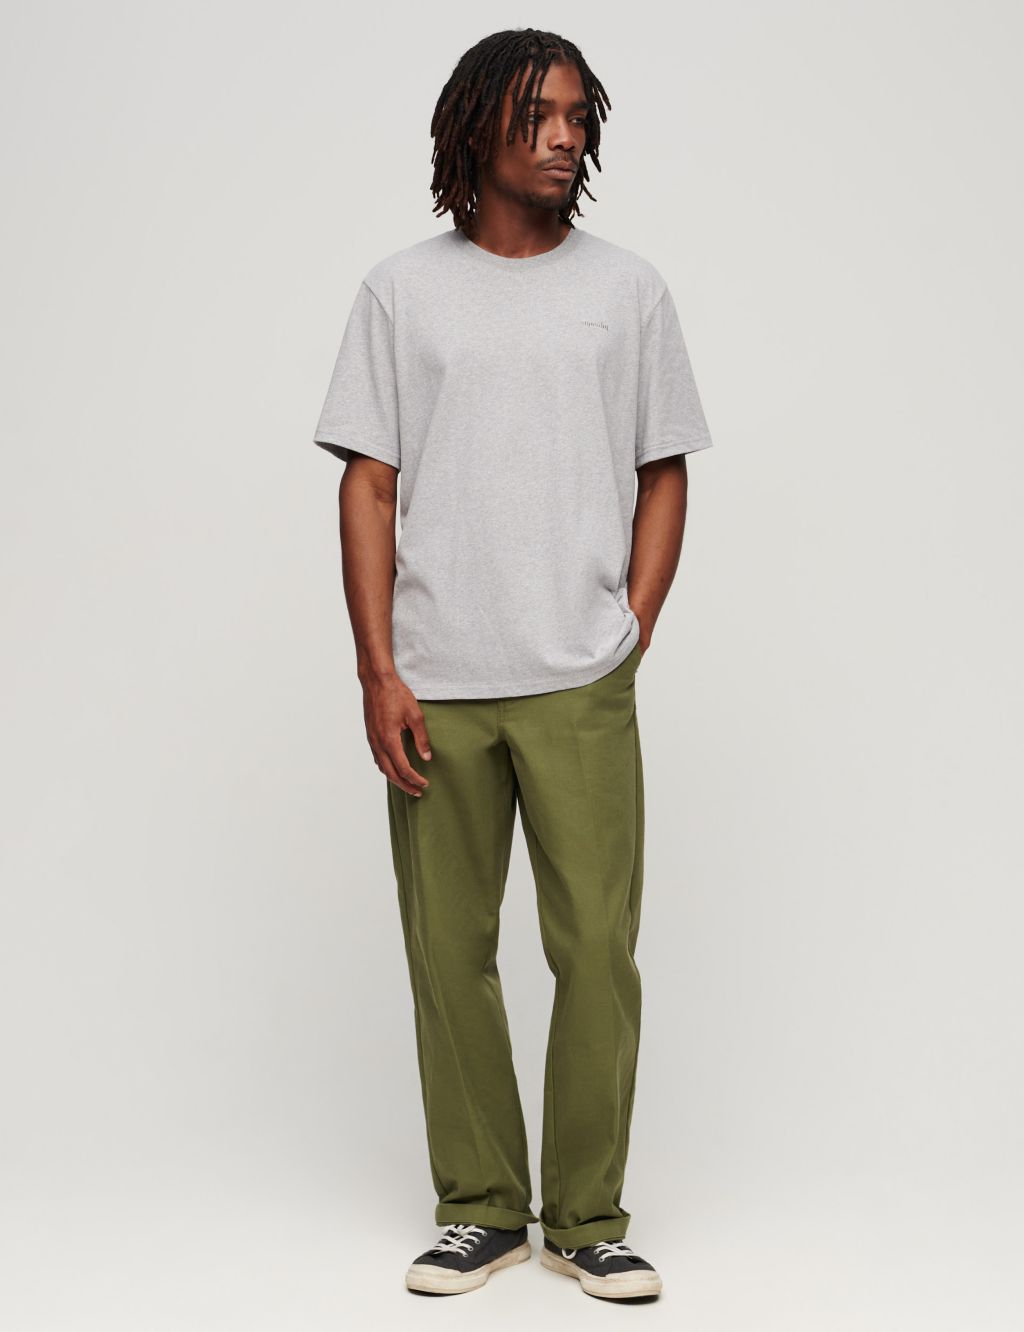 Men’s Relaxed-Fit T-Shirts | M&S